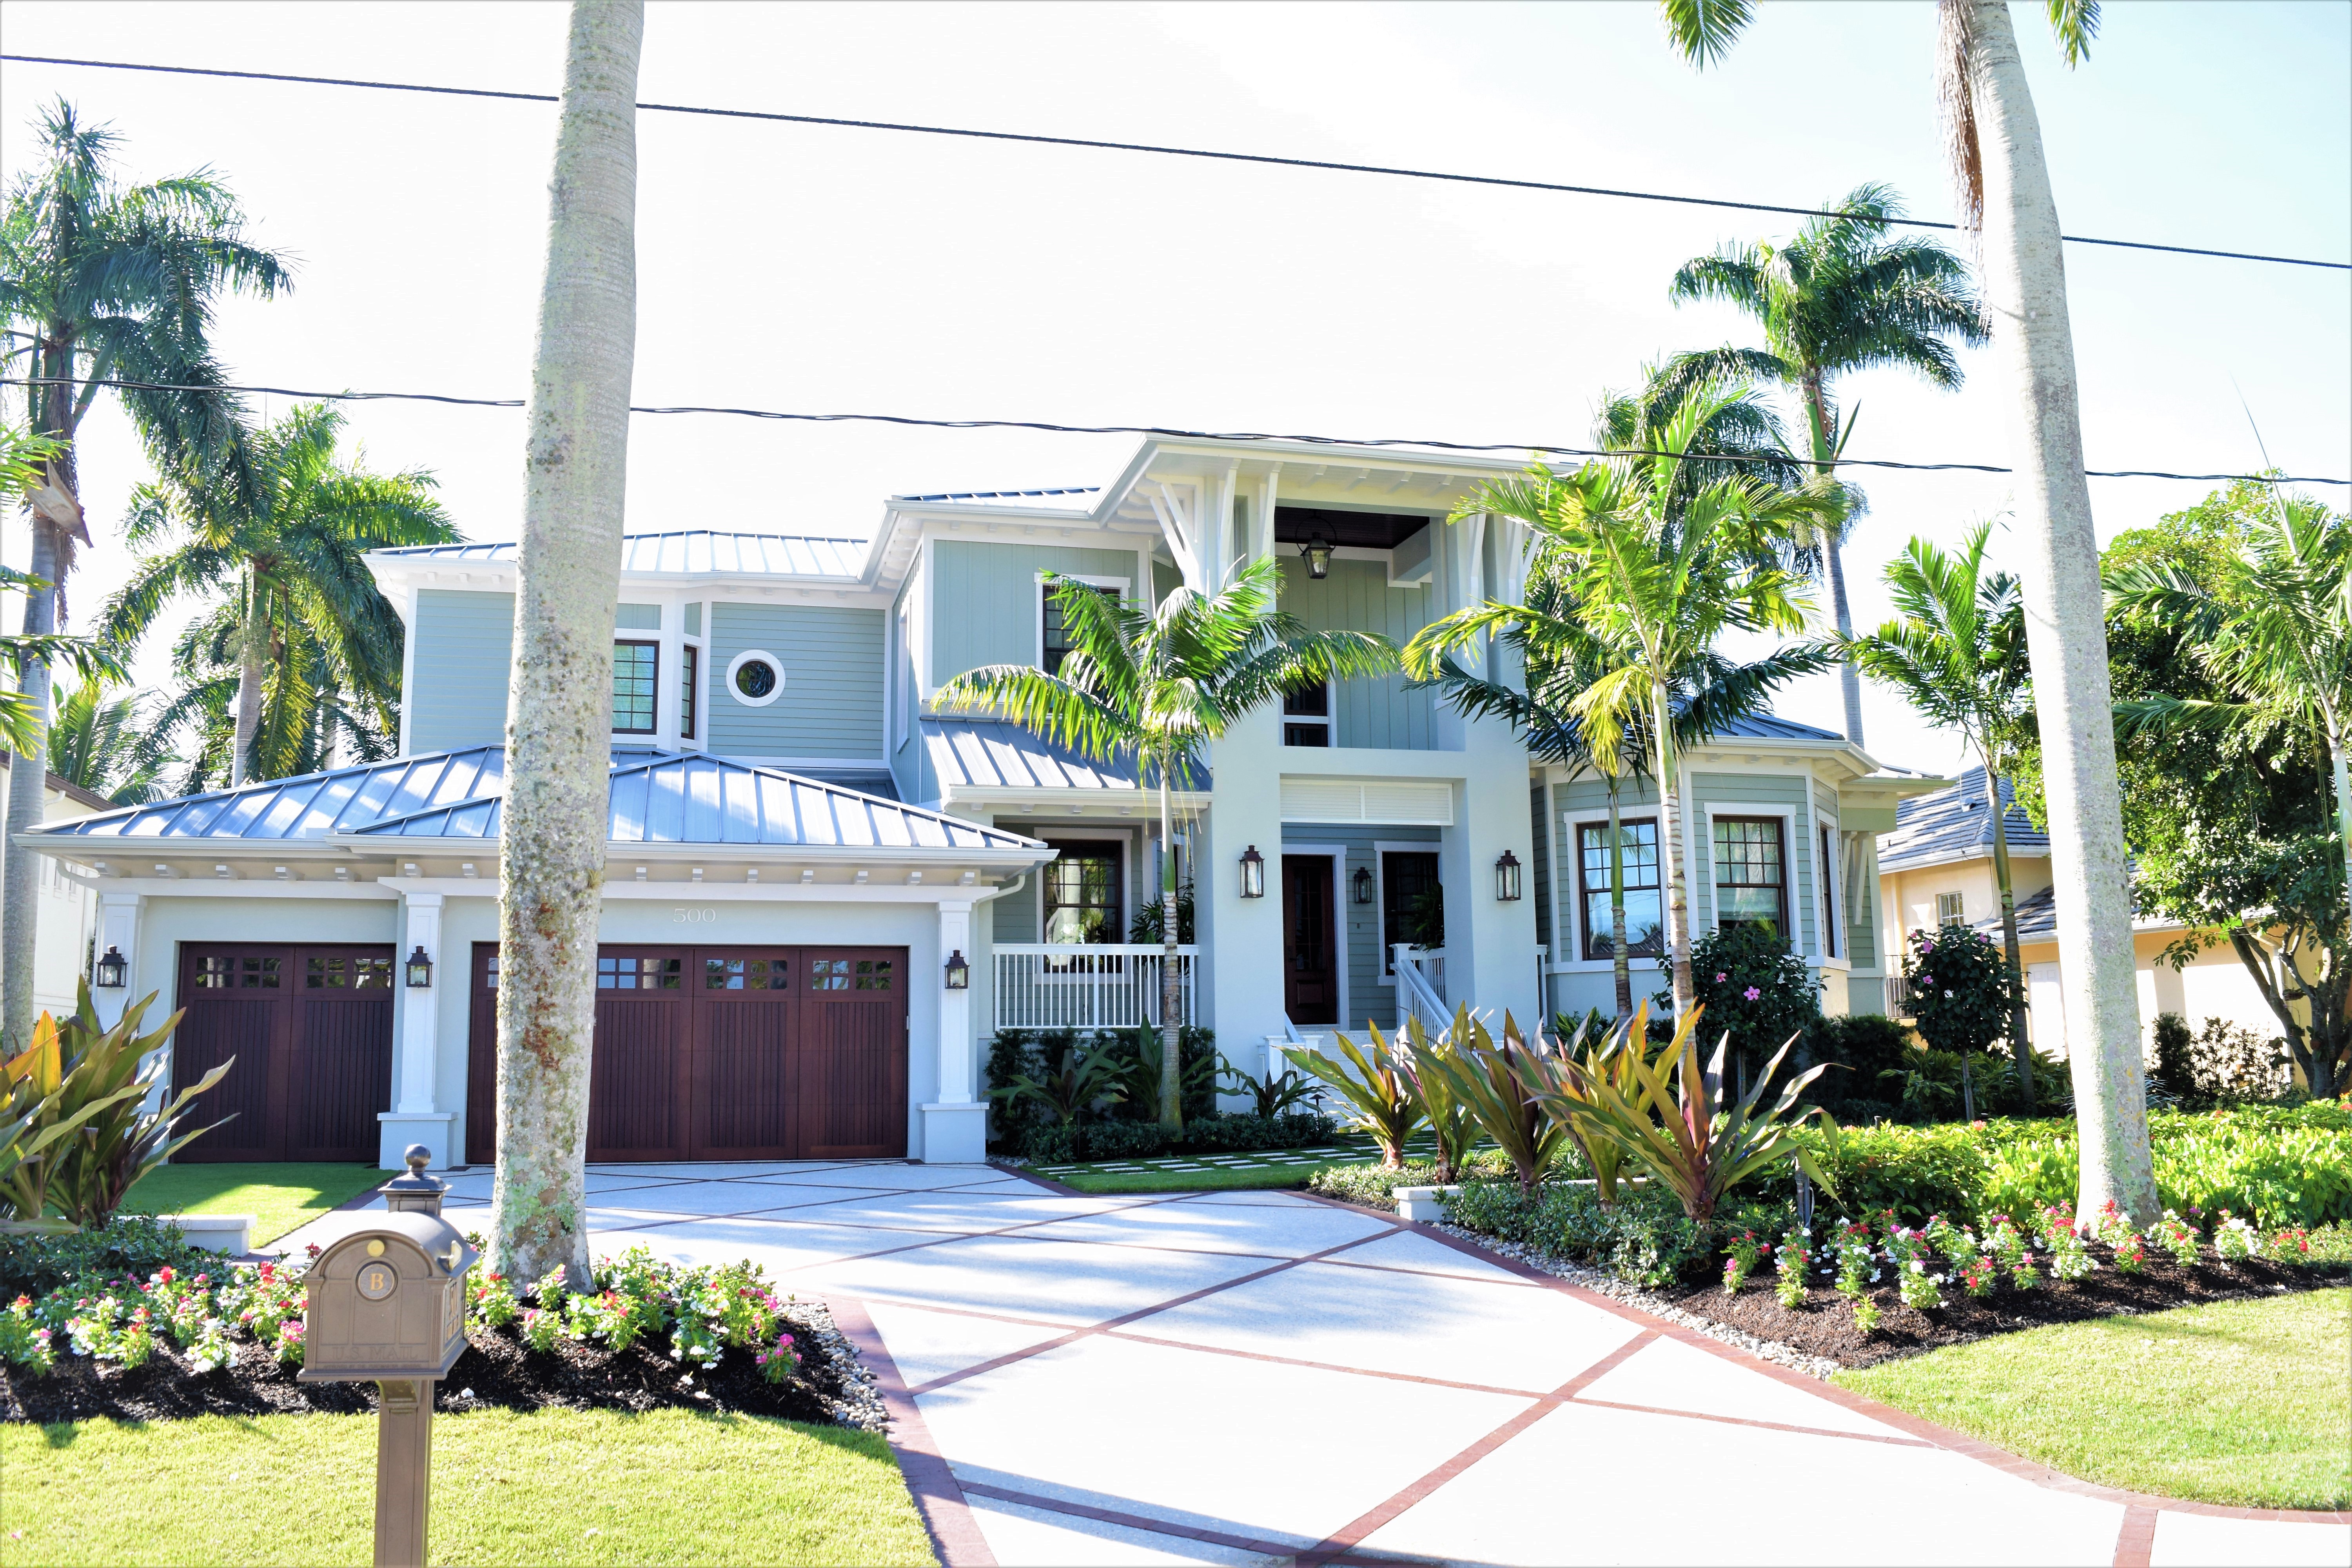 Residential Property Management in and near Marco Island Florida